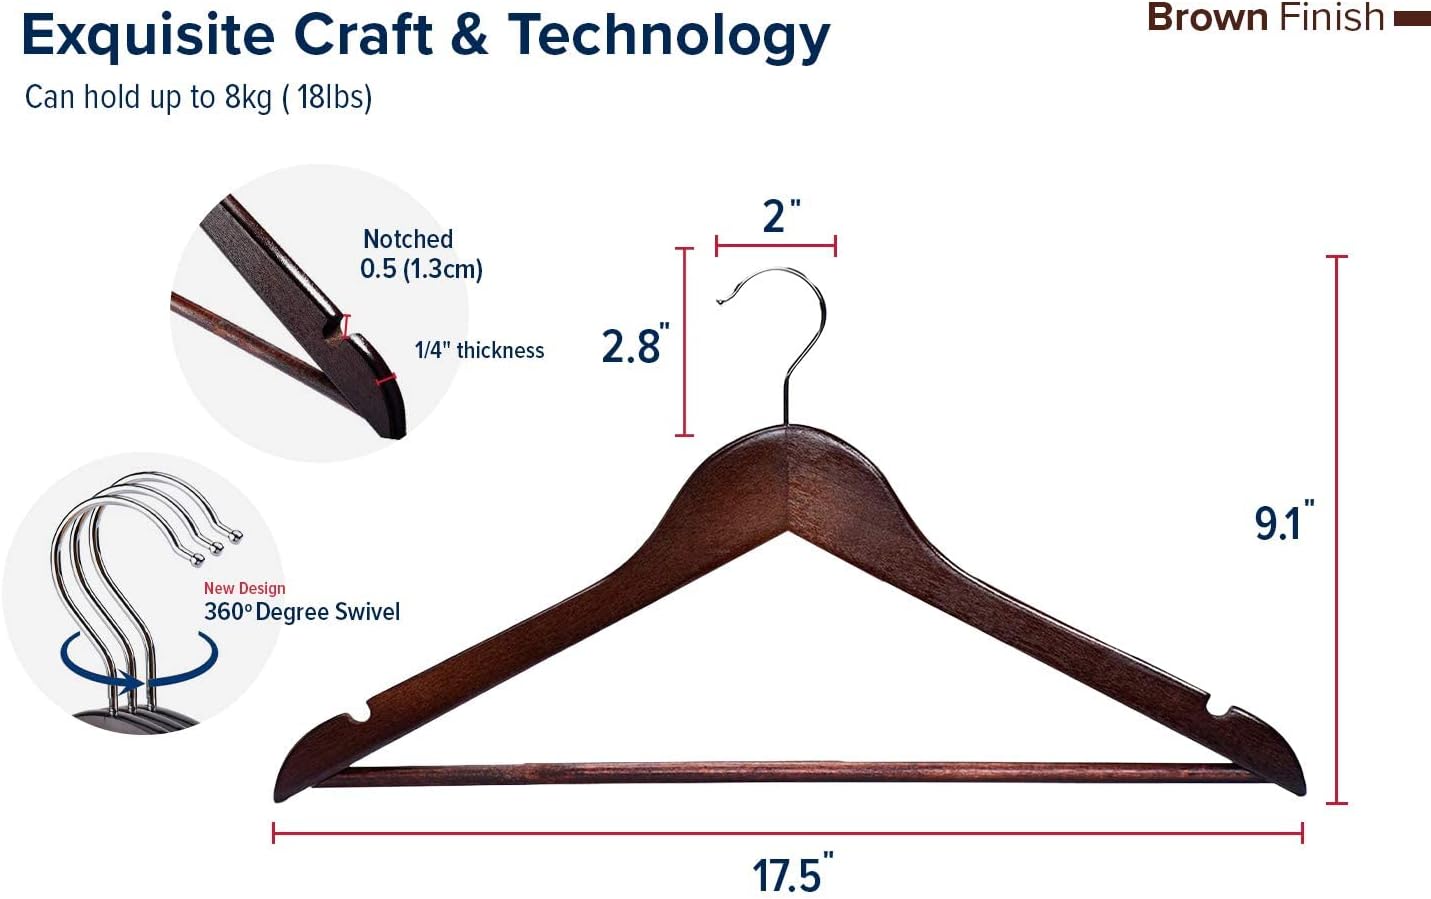 HOUSE DAY 17.7X9 Inch Solid Wood Coat Hangers Brown 10 Pack